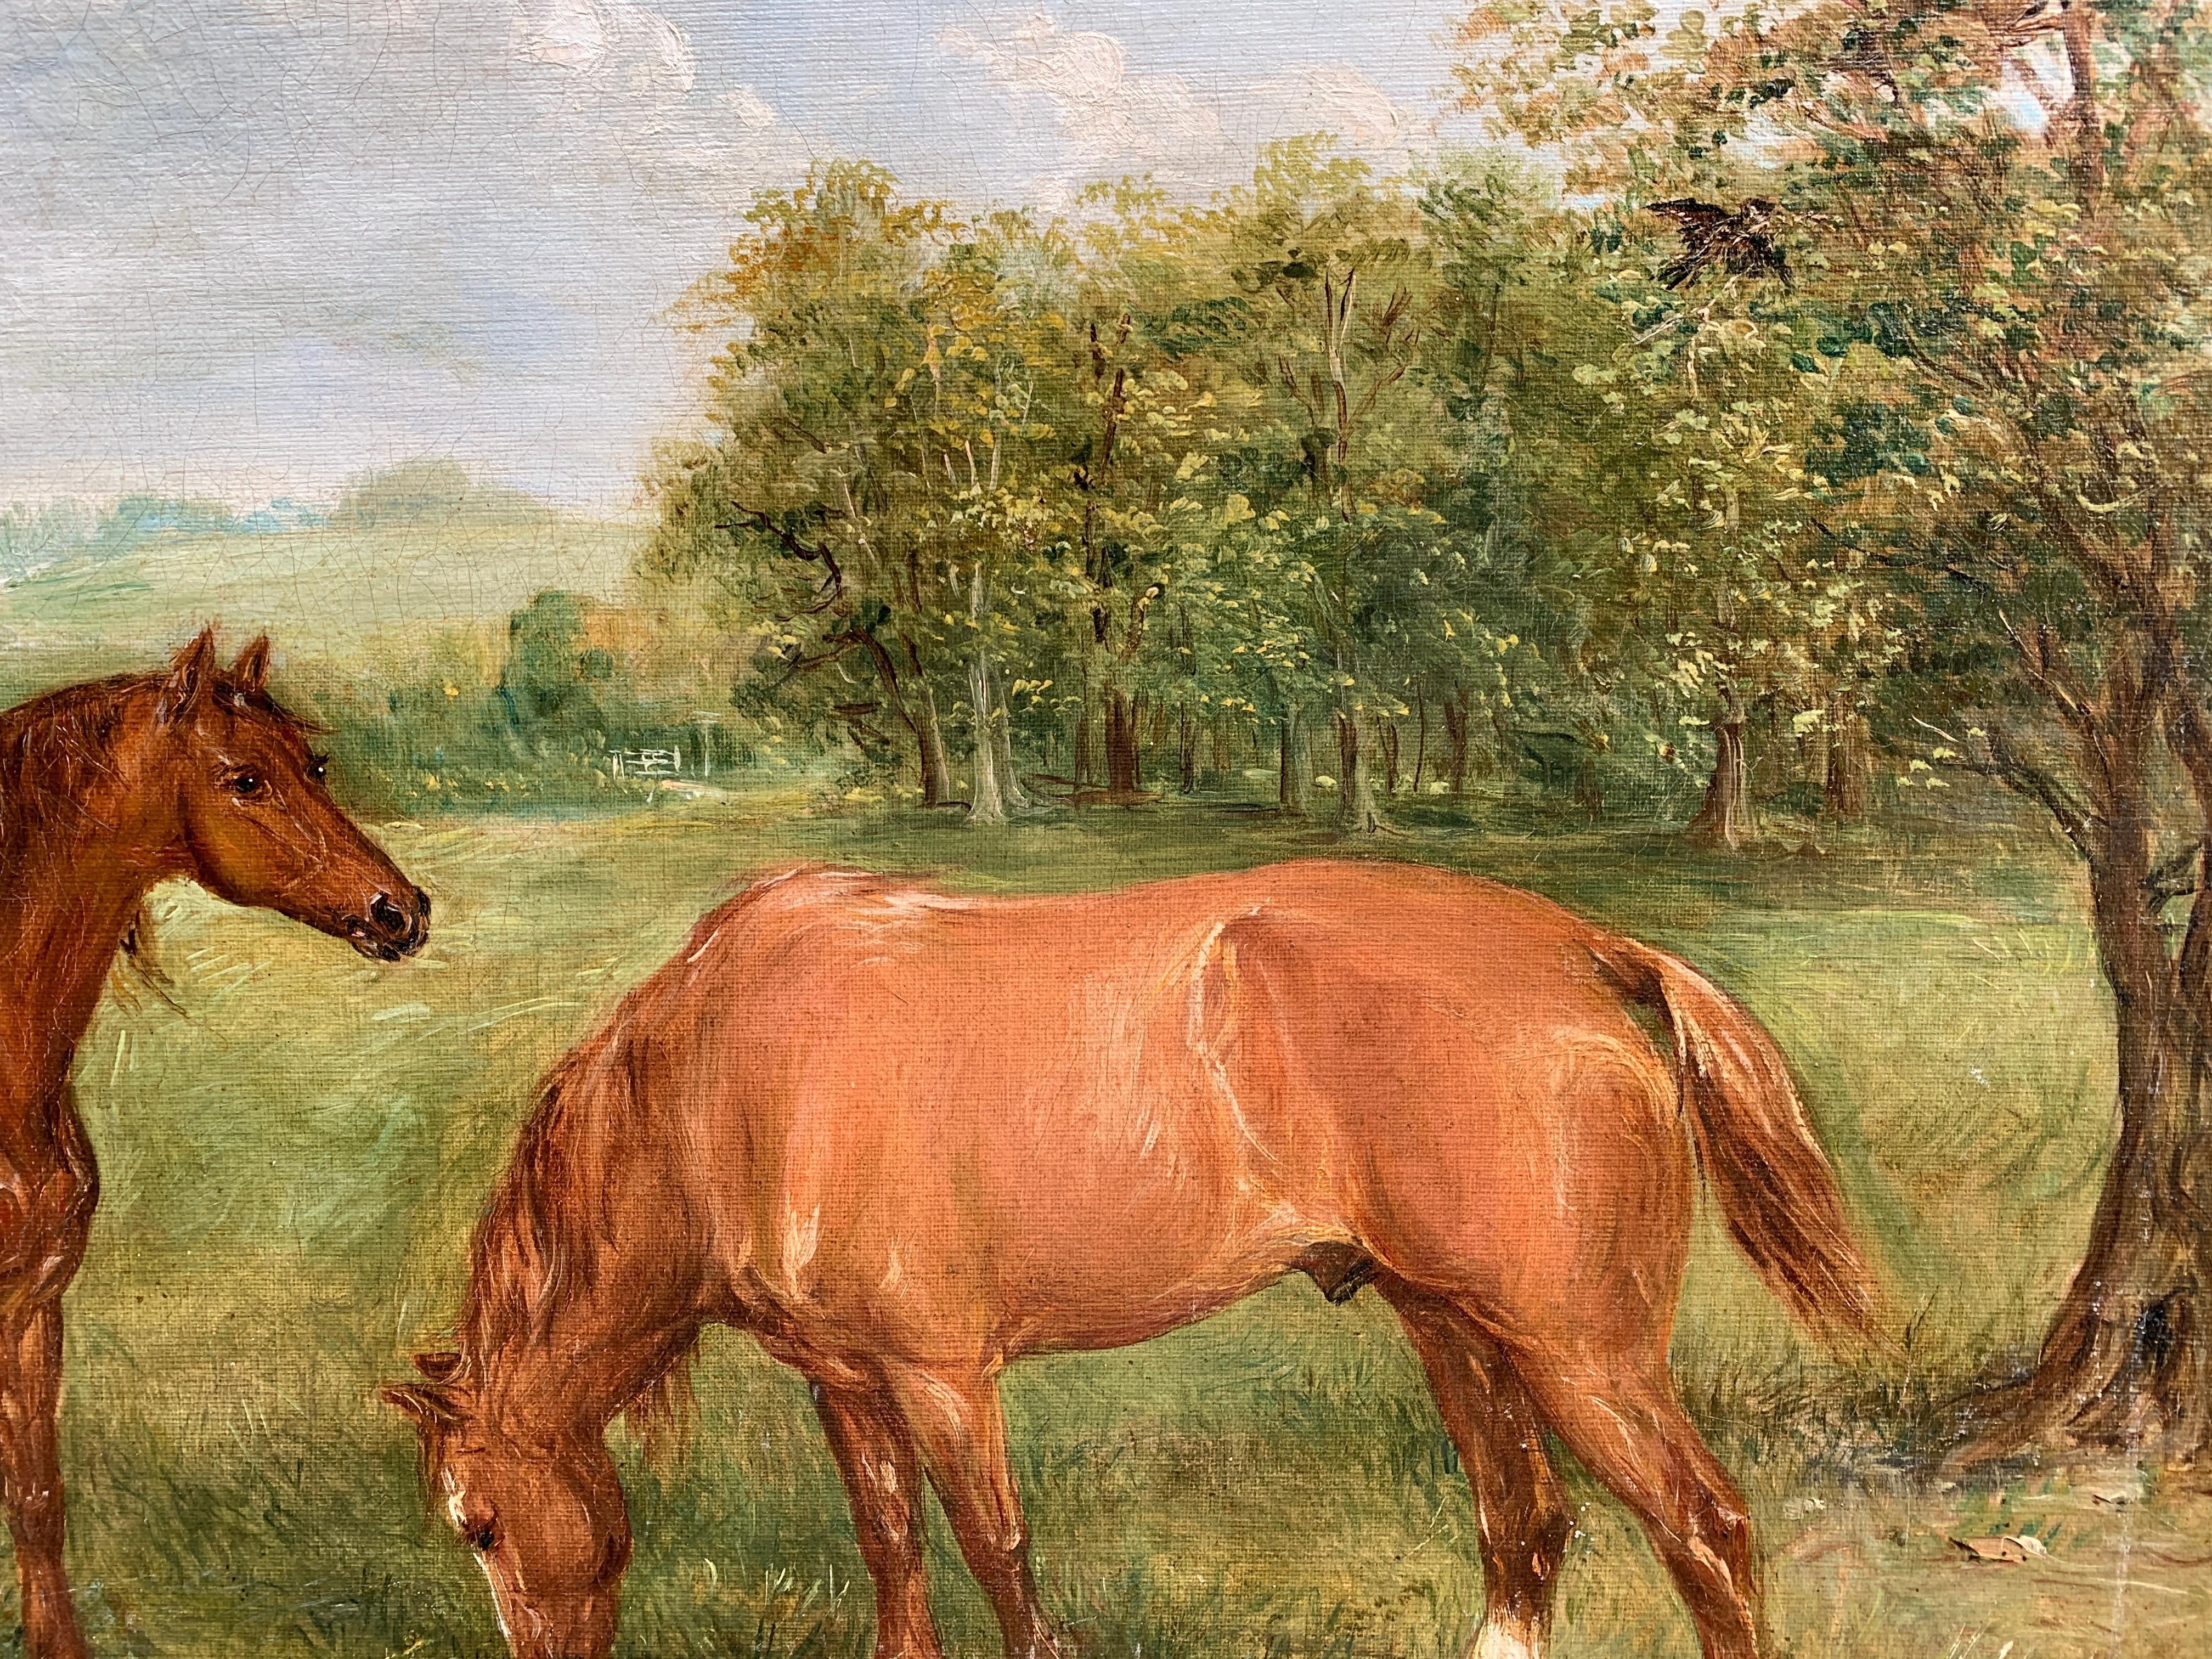 Early 20th century portrait of  shire or Clydesdale horses in a landscape. - Brown Animal Painting by Edwin Frederick Holt